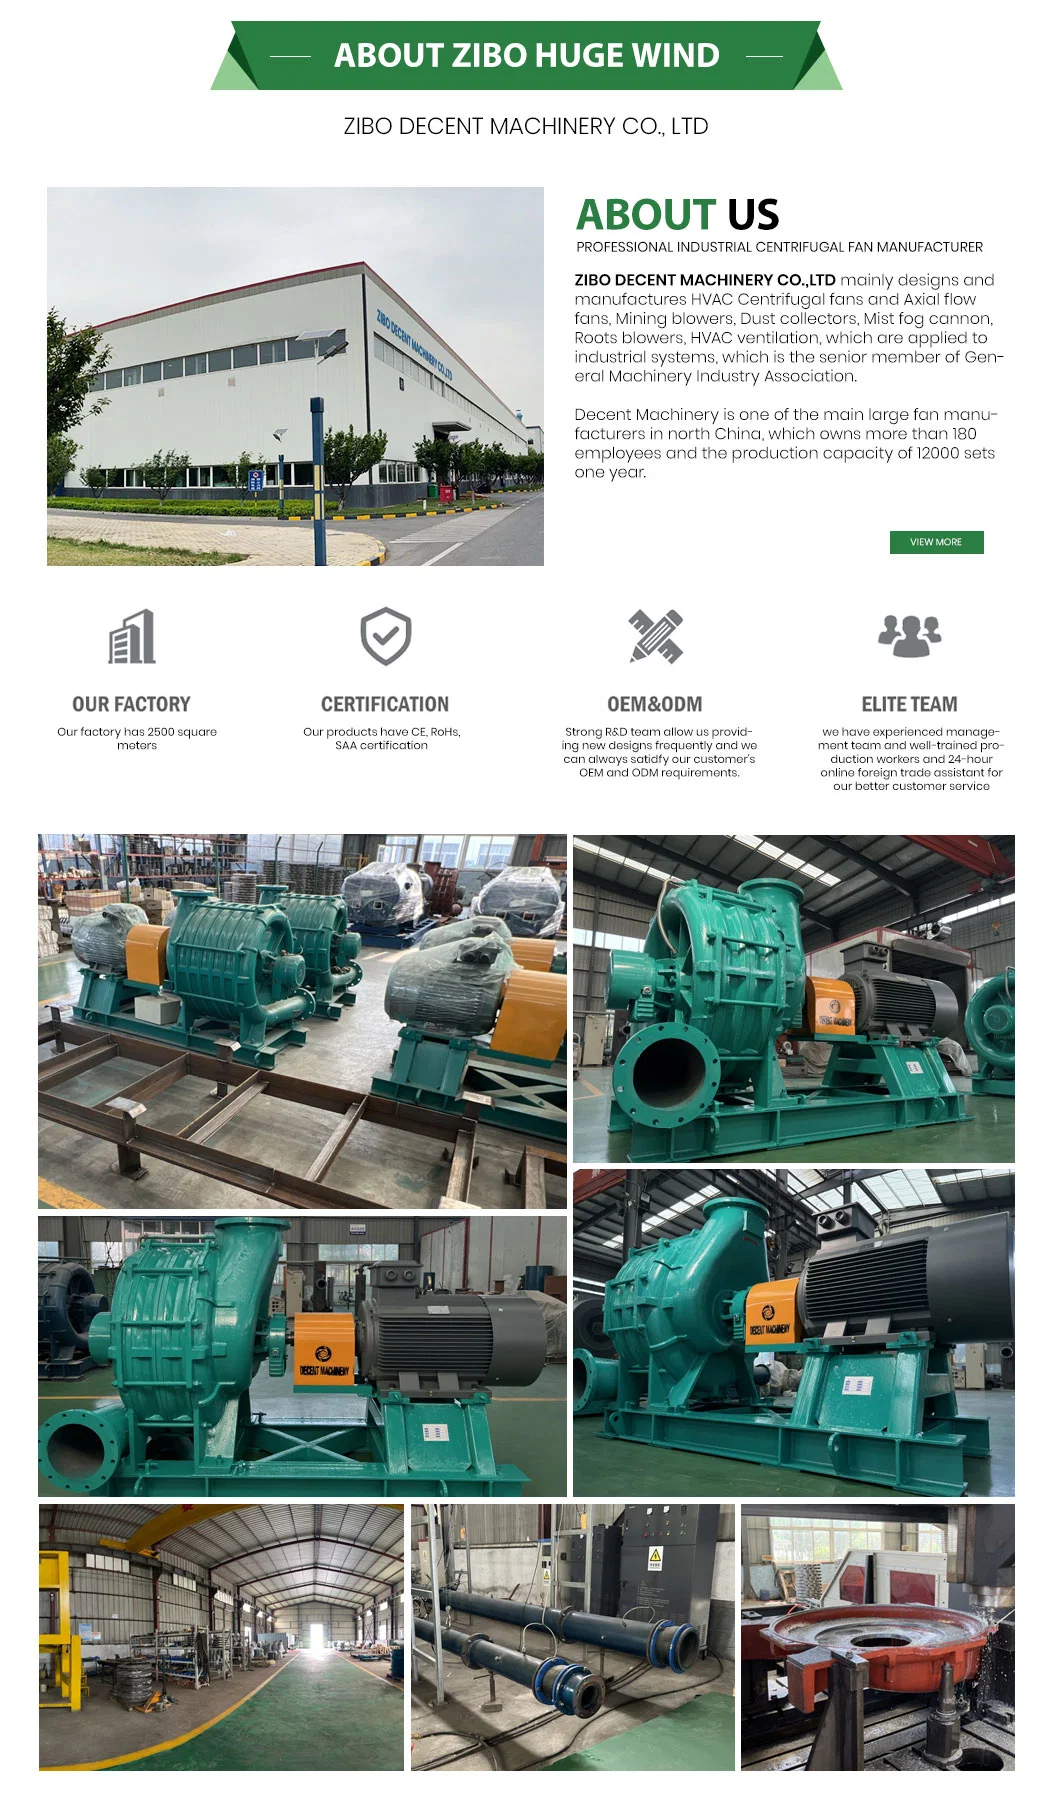 C650-1.1208/0.77 Hot Sell HP Centrifugal Blower China Manufacturing Pneumatic Conveying System Centrifugal Blower